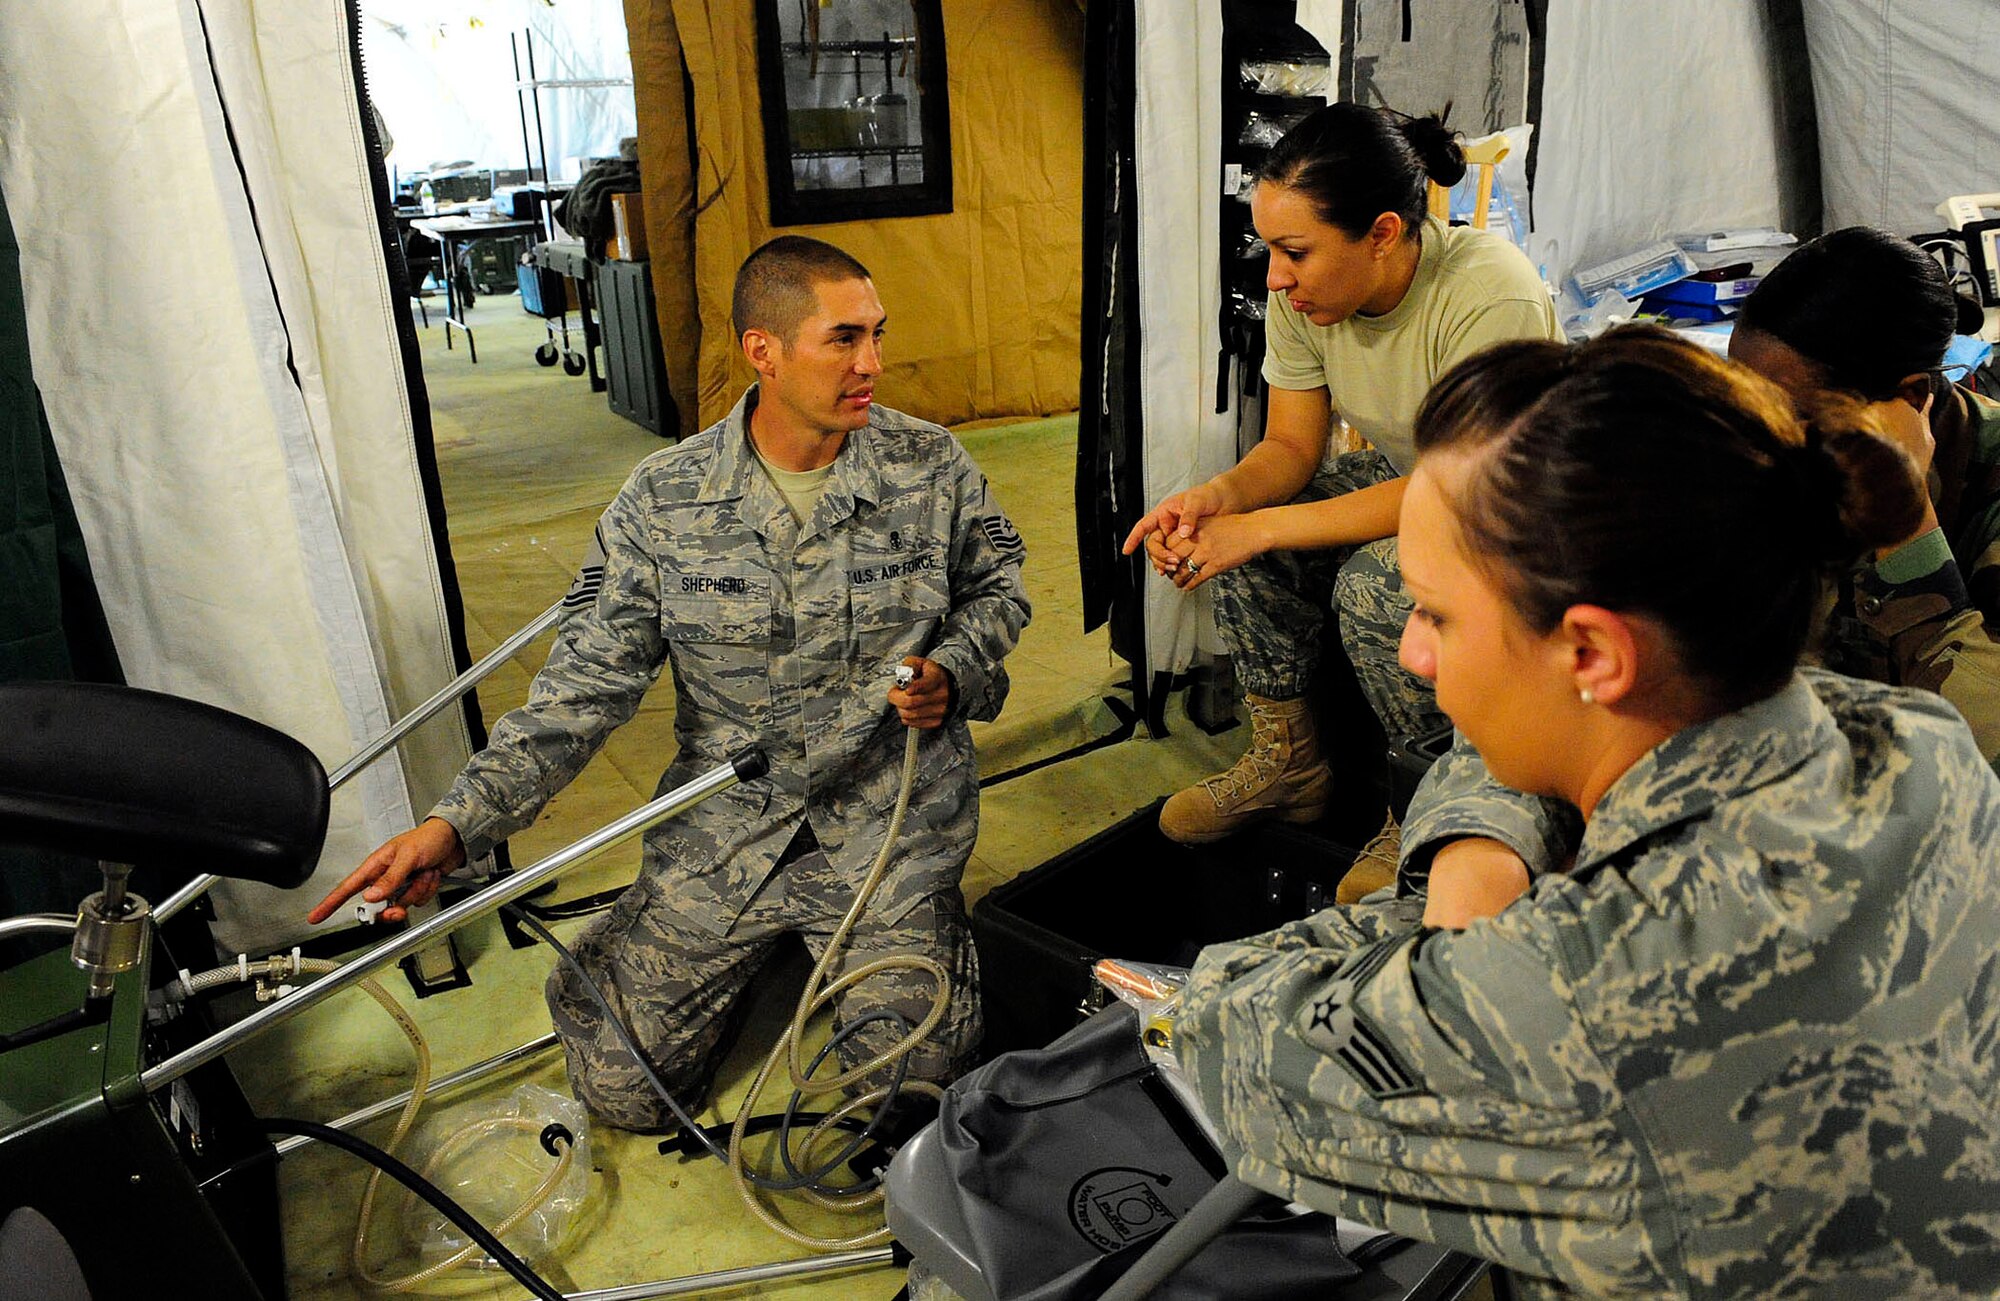 Master Sgt. Joel Shepherd teaches Airmen how to install a field sink in an expeditionary hospital March 13, 2010, in Angol, Chile. The Airmen are part of an Air Force Expeditionary Medical Support team building a mobile hospital here to help augment medical services for nearly 110,000 Chileans in the region. Sergeant Shepherd is assigned to the 81st Aerospace Medical Squadron at Keesler Air Force Base Miss. (U.S. Air Force photo/Senior Airman Tiffany Trojca)